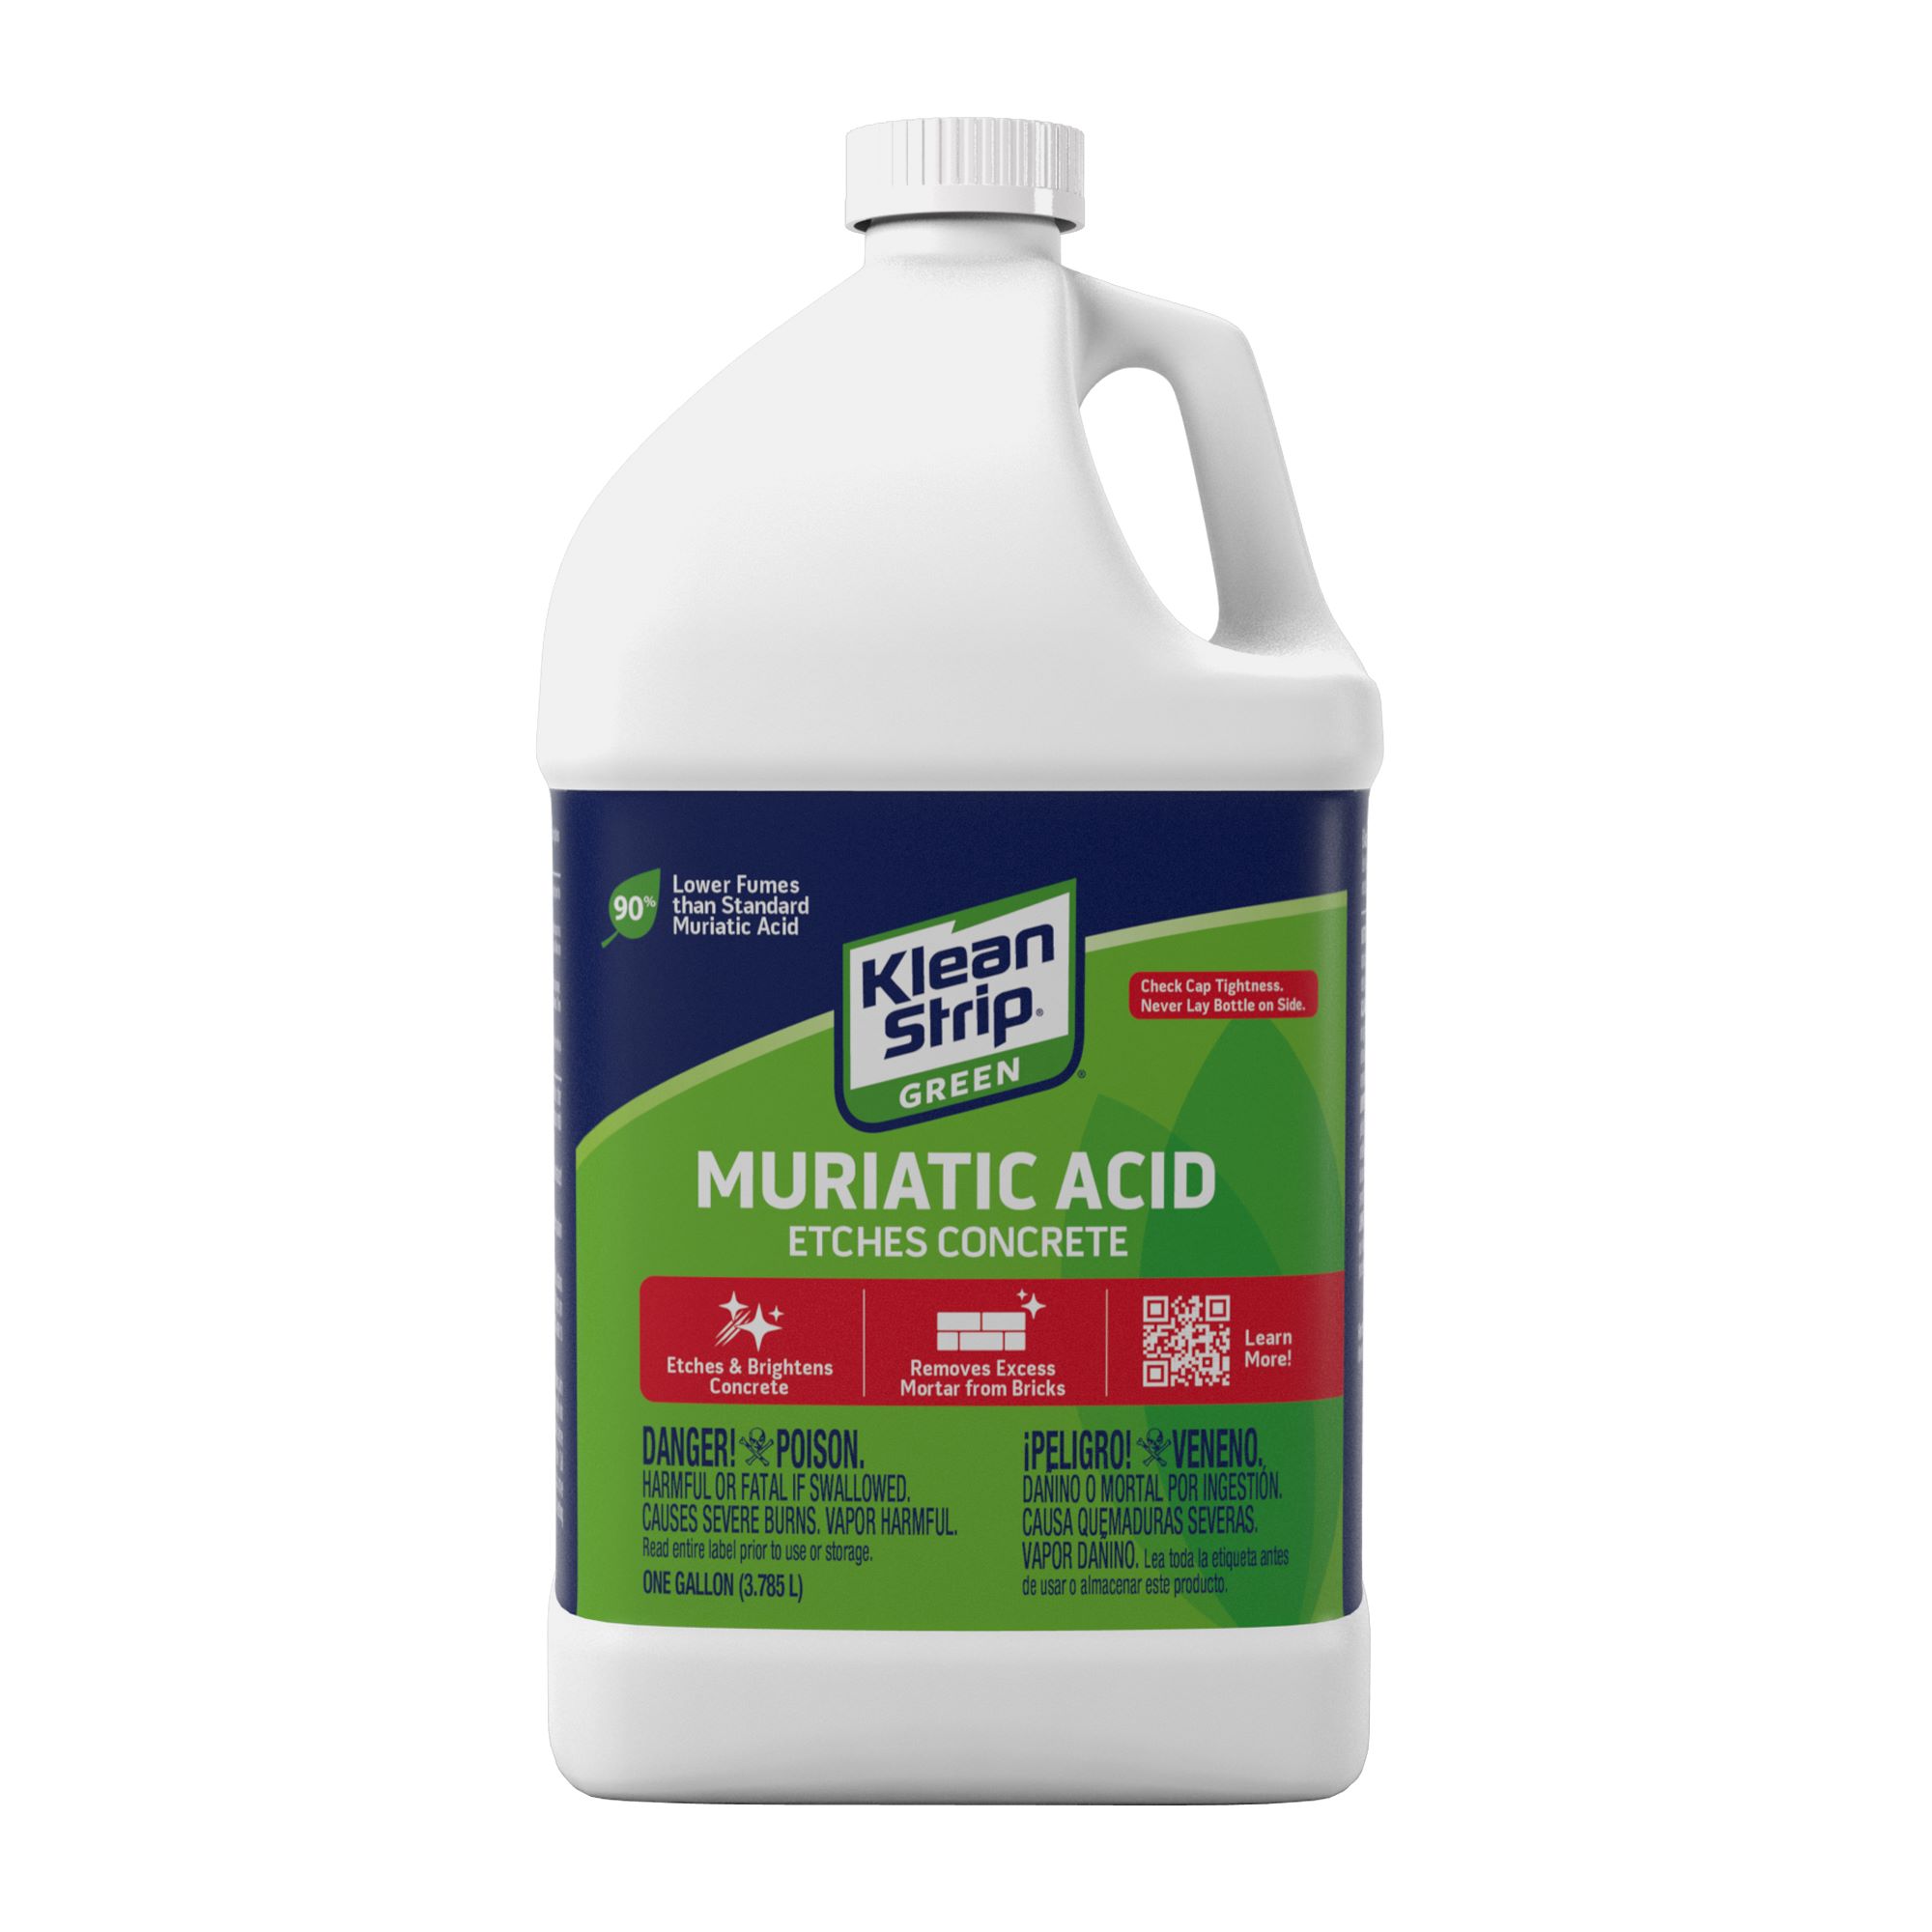 How To Store Muriatic Acid